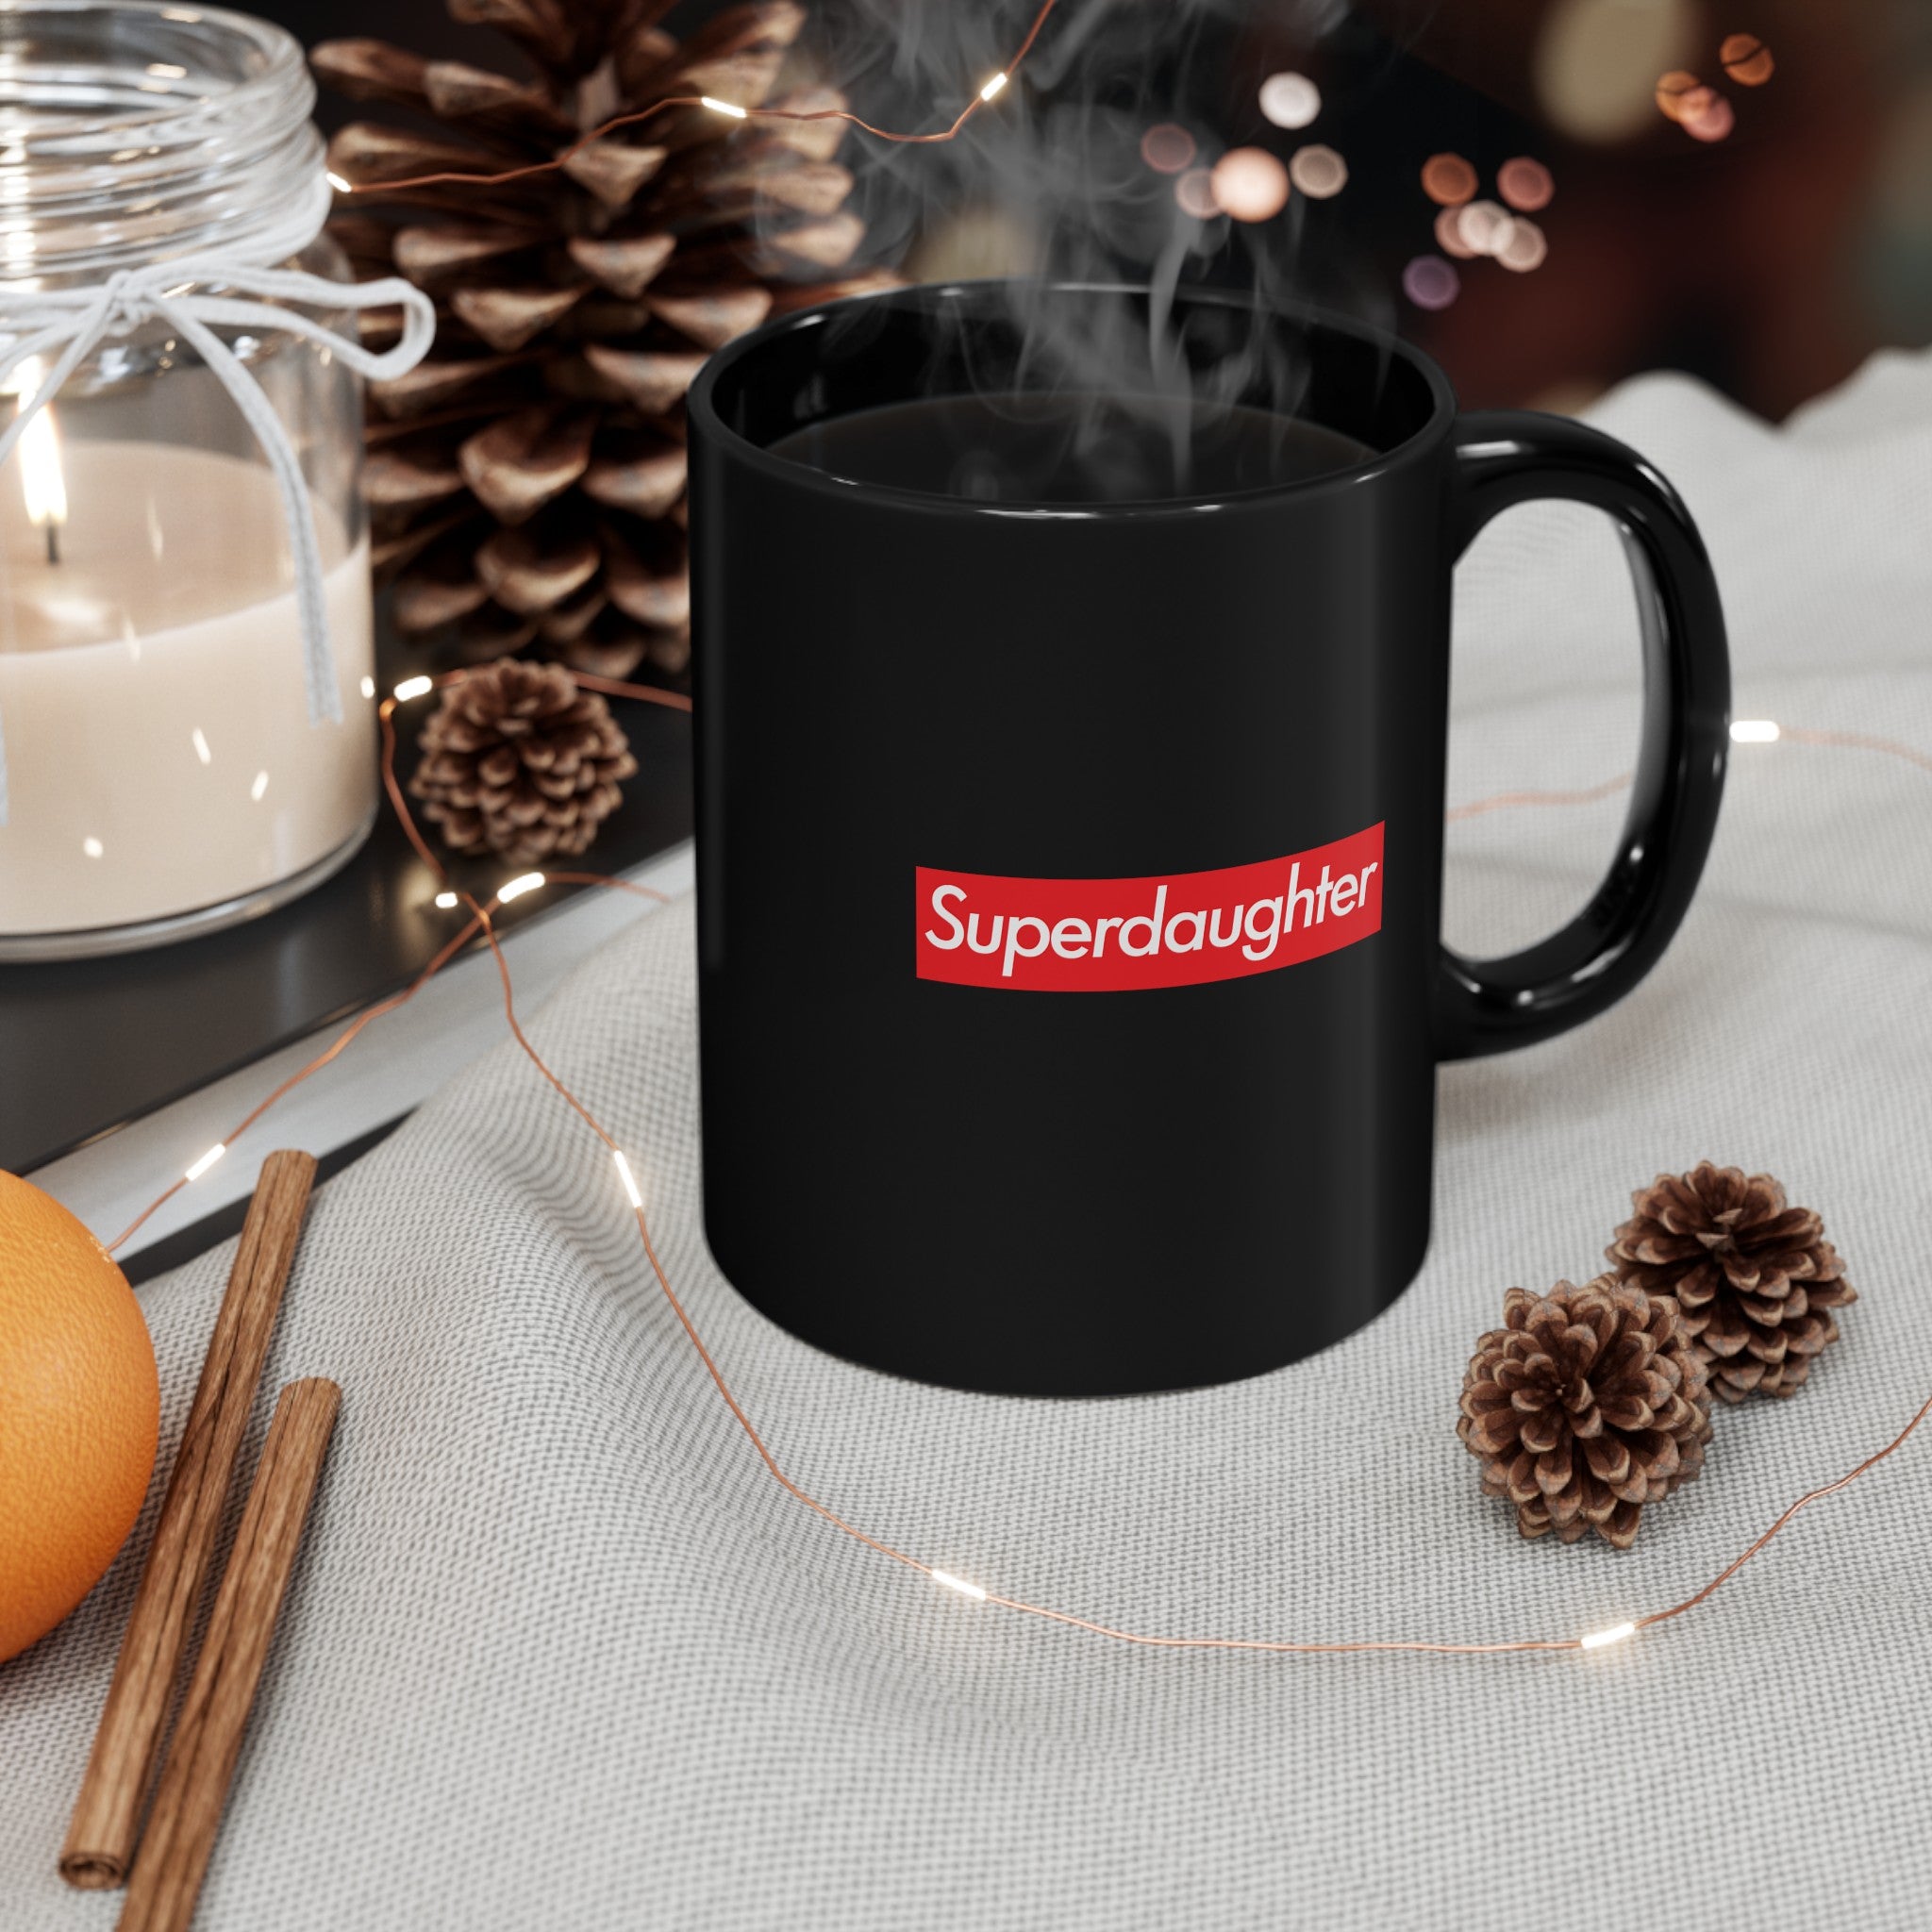 Superdaughter Black Mug (11oz, 15oz) super Inspired Funny Daughter Appreciation Gift For Daughters Girl Thank You Thankful Birthday Christmas